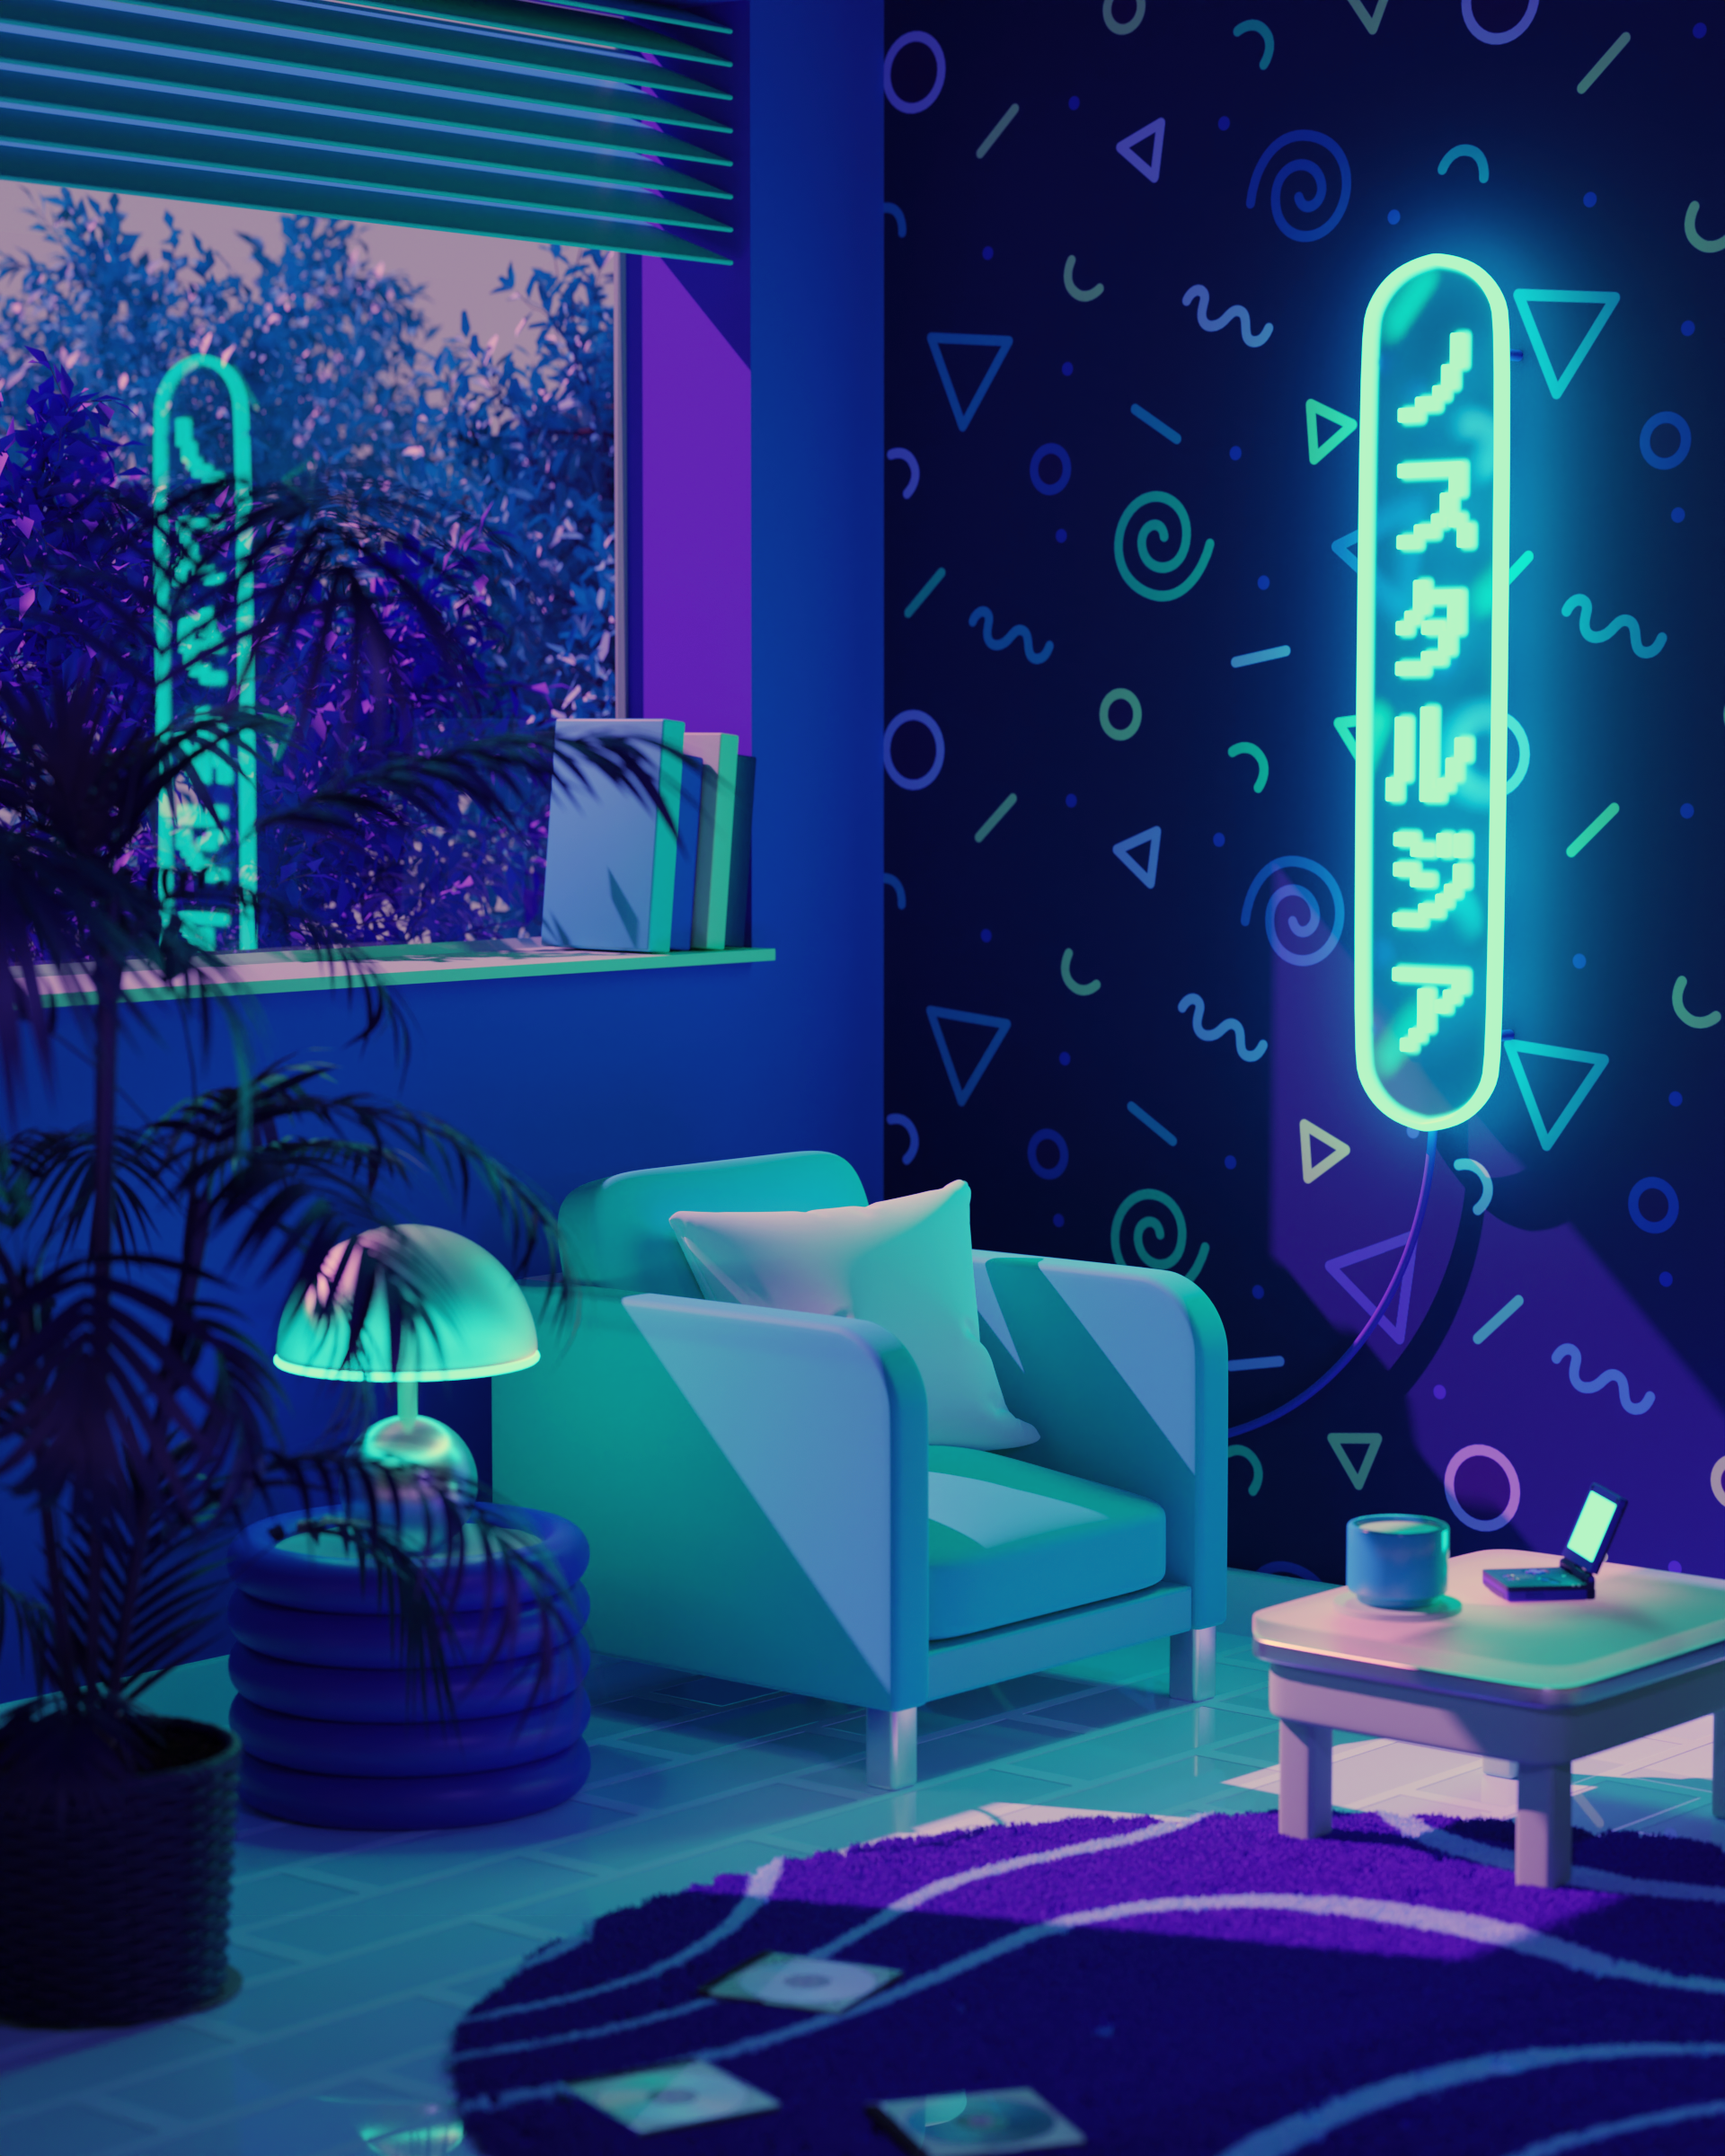 a room with a neon sign reading ノスタルジア illuminates an armchair chair against a window, with books on the window sill. a coffee table holds a gameboy SP and a matcha latte in a mug. there are three CDs on the floor.